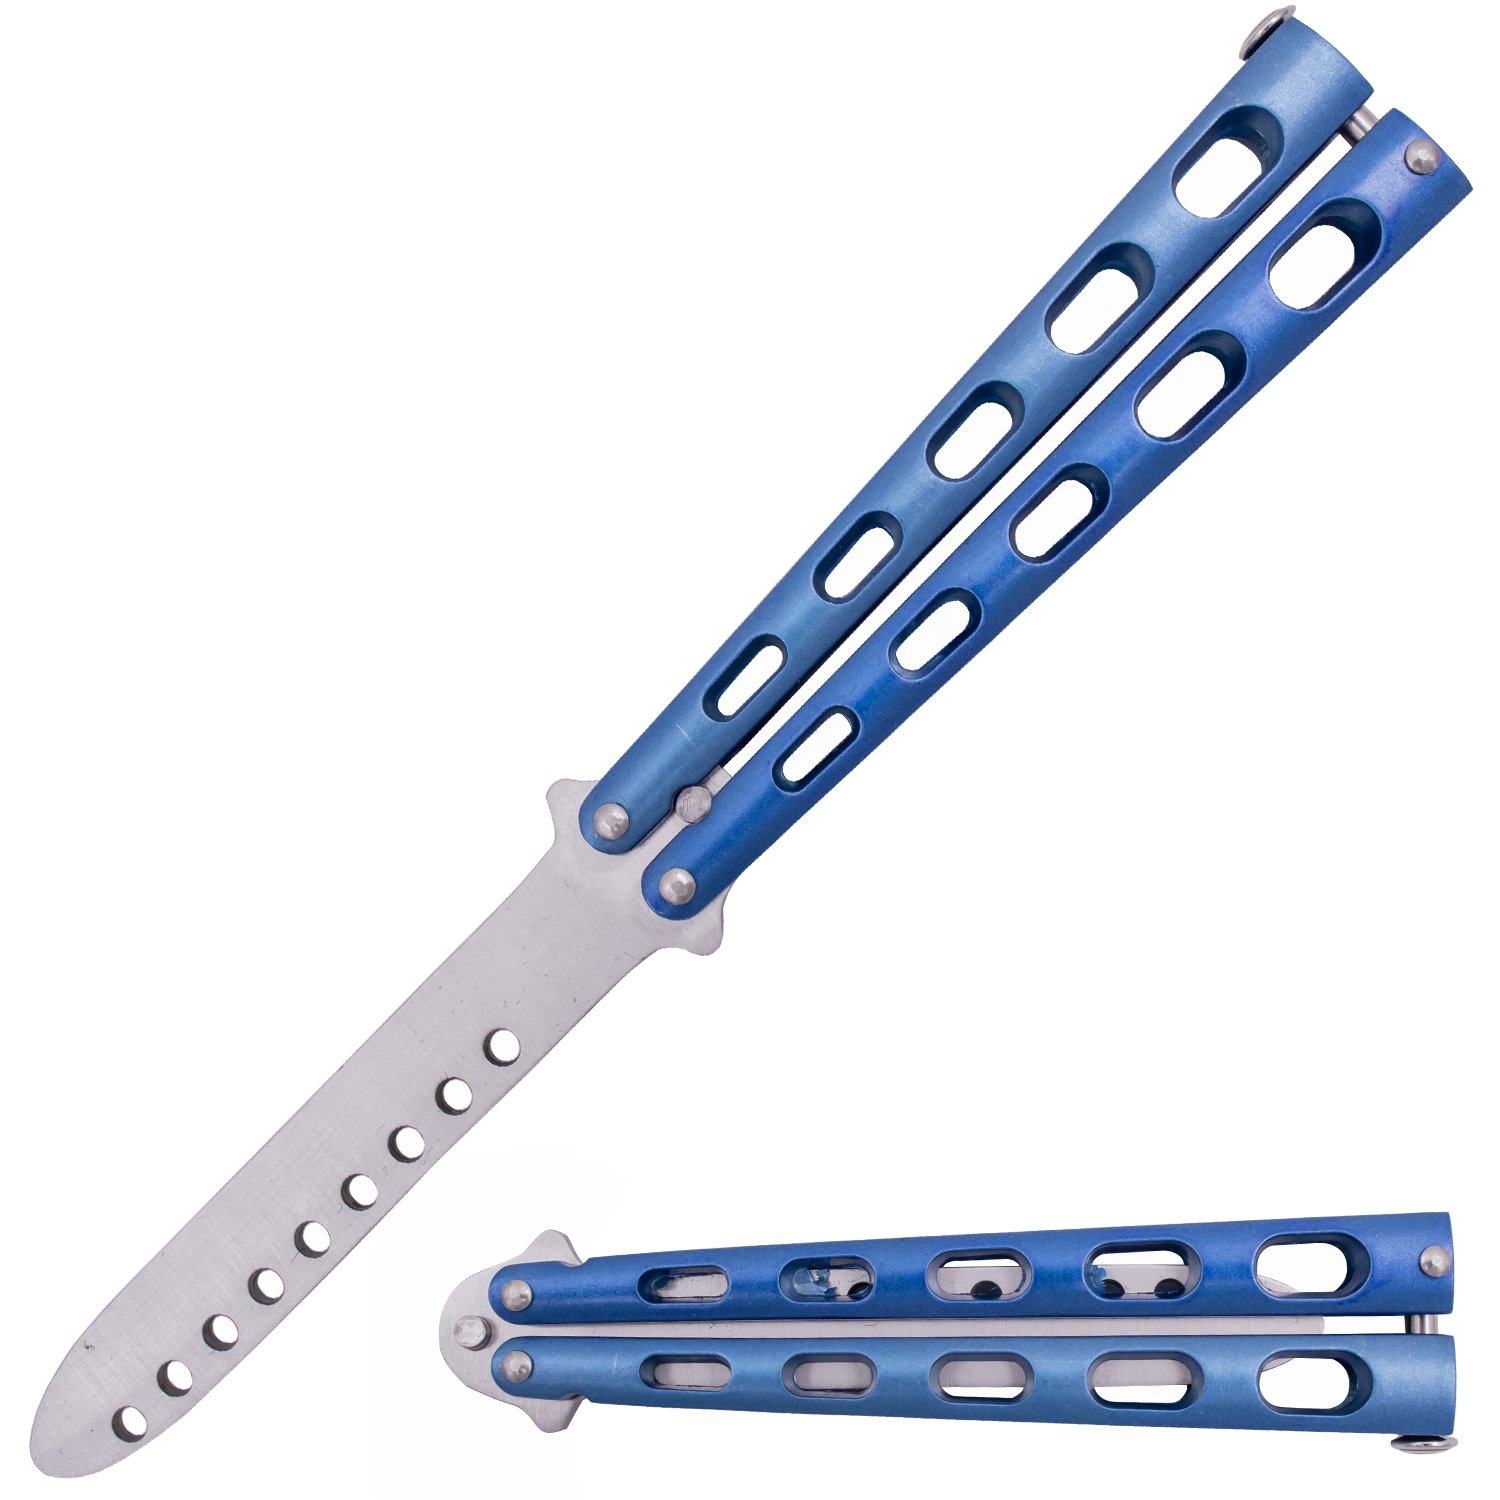 Tiger USA Butterfly Training Knife 440 Stainless 8.85 Inch   Blue